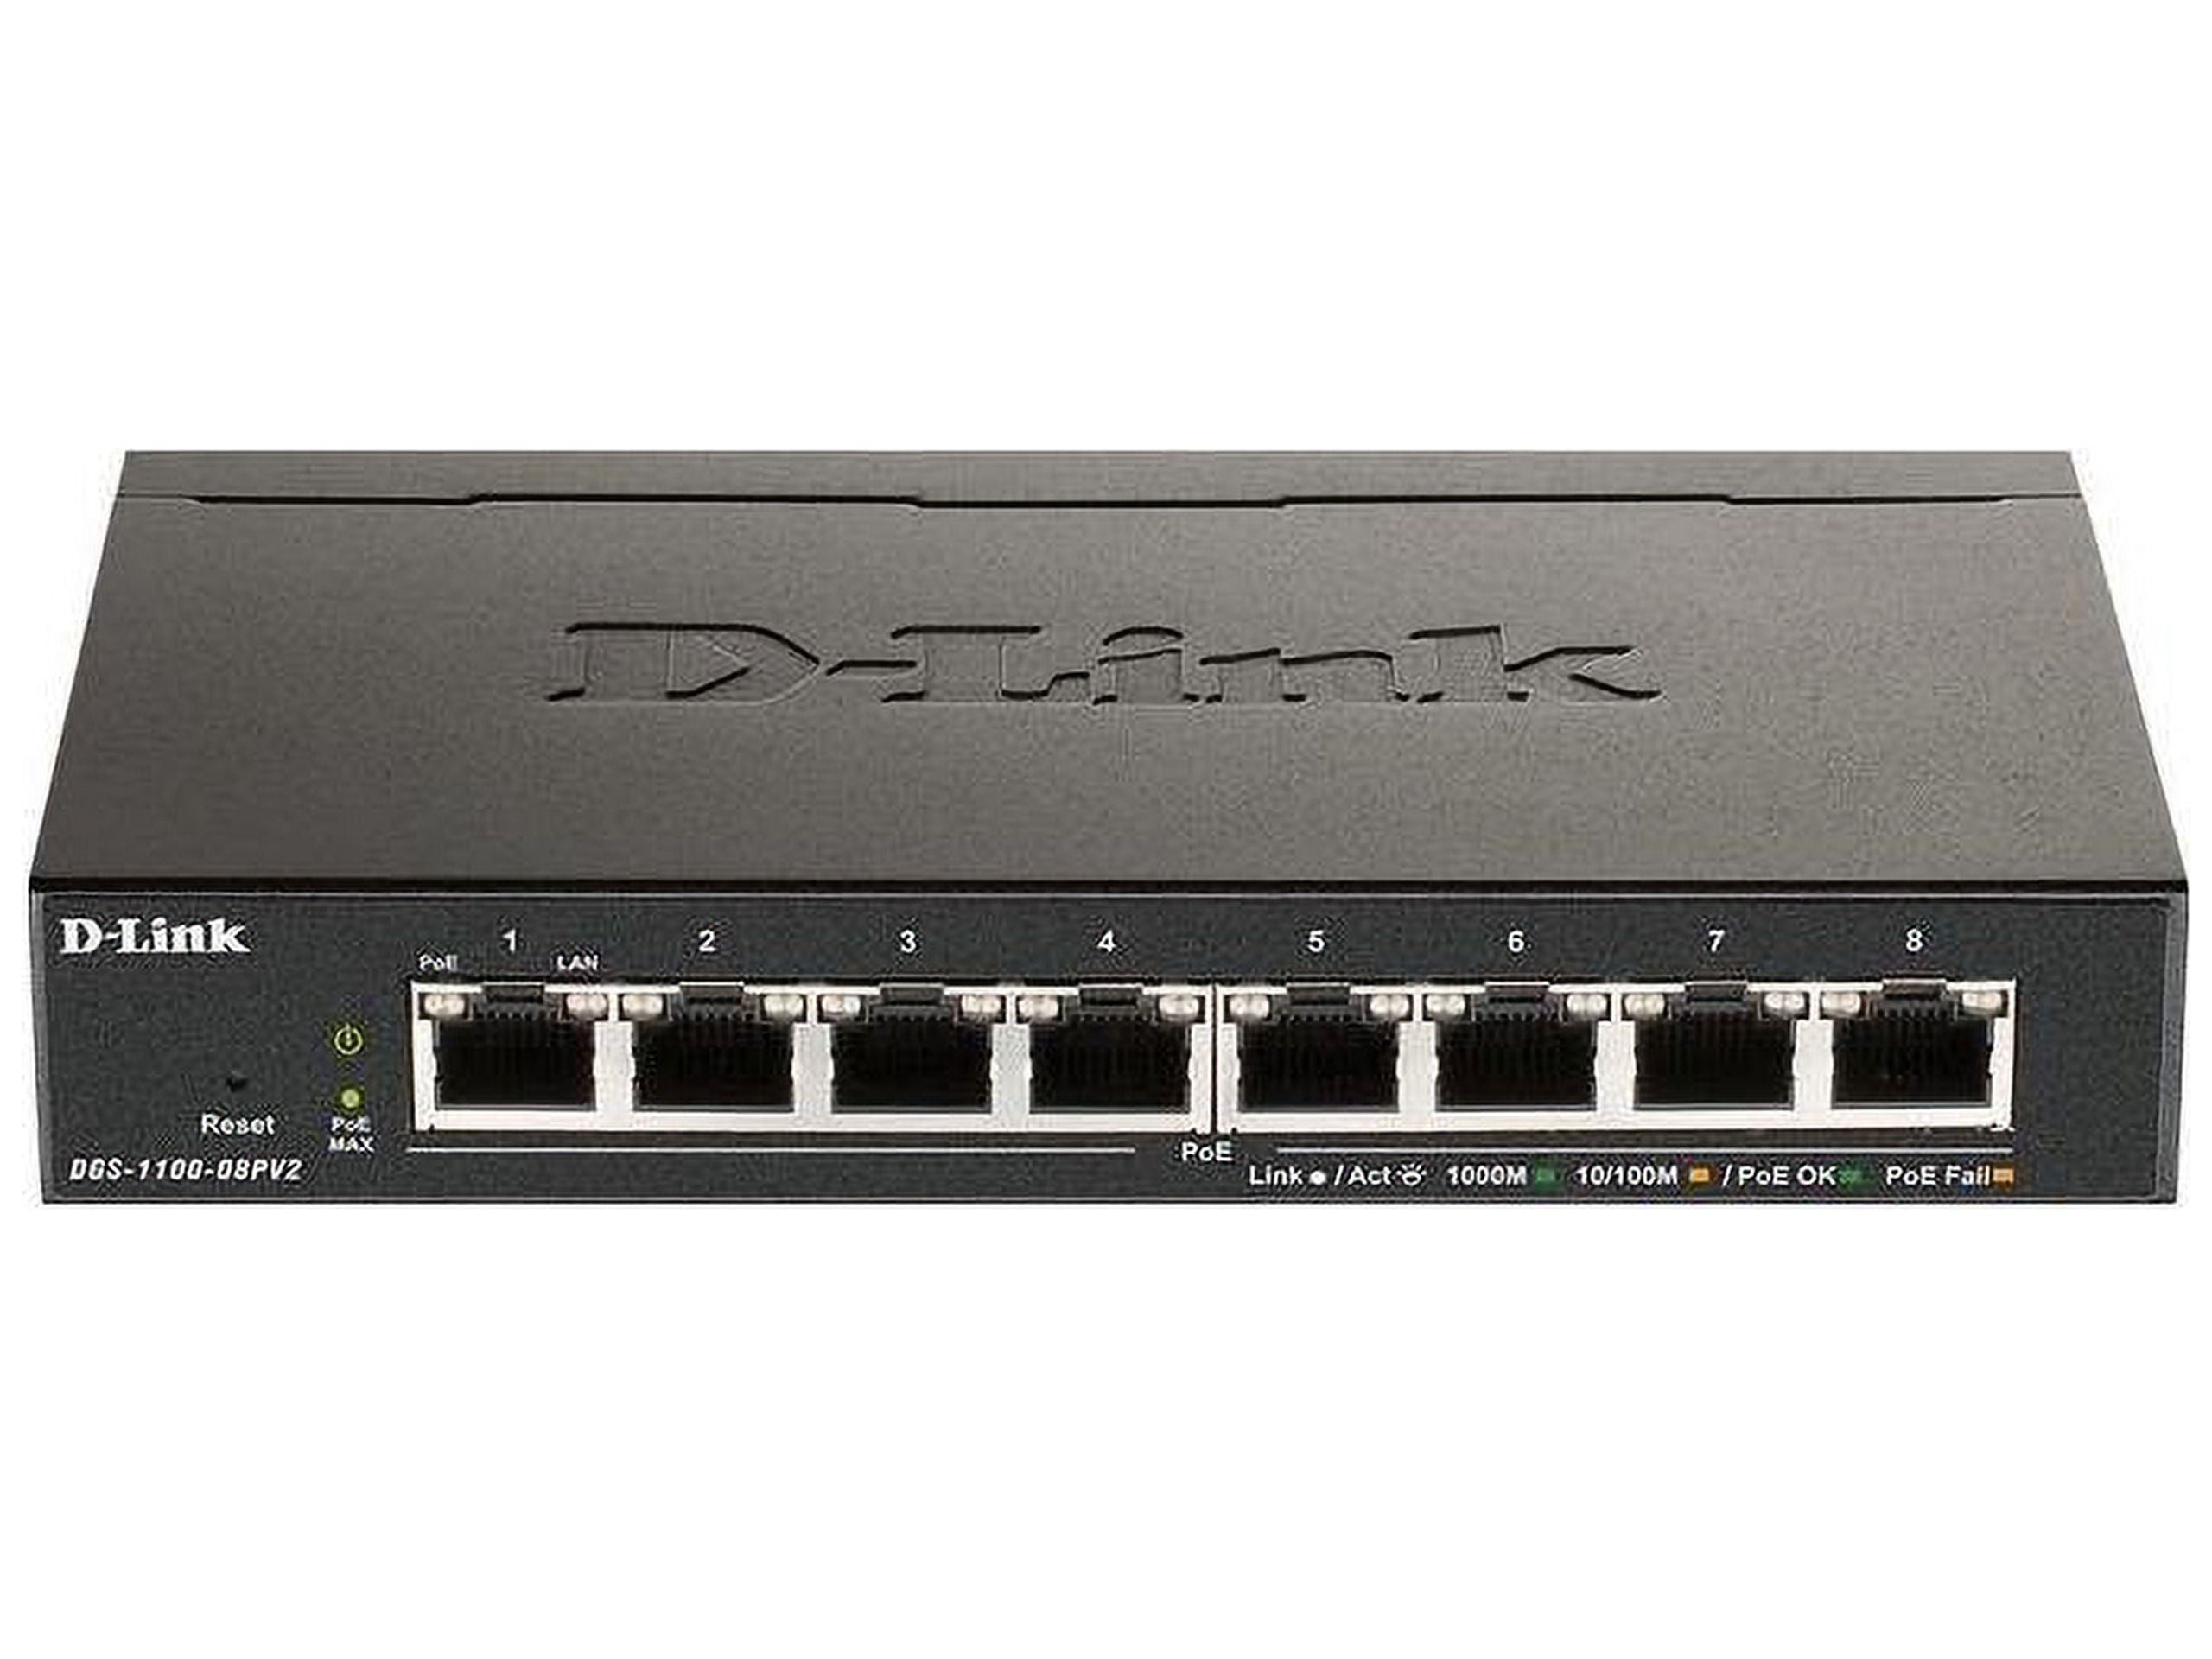 Picture of D-Link Business DGS-1100-08PV2 8 Port Gig PoE Smart Switch, Black